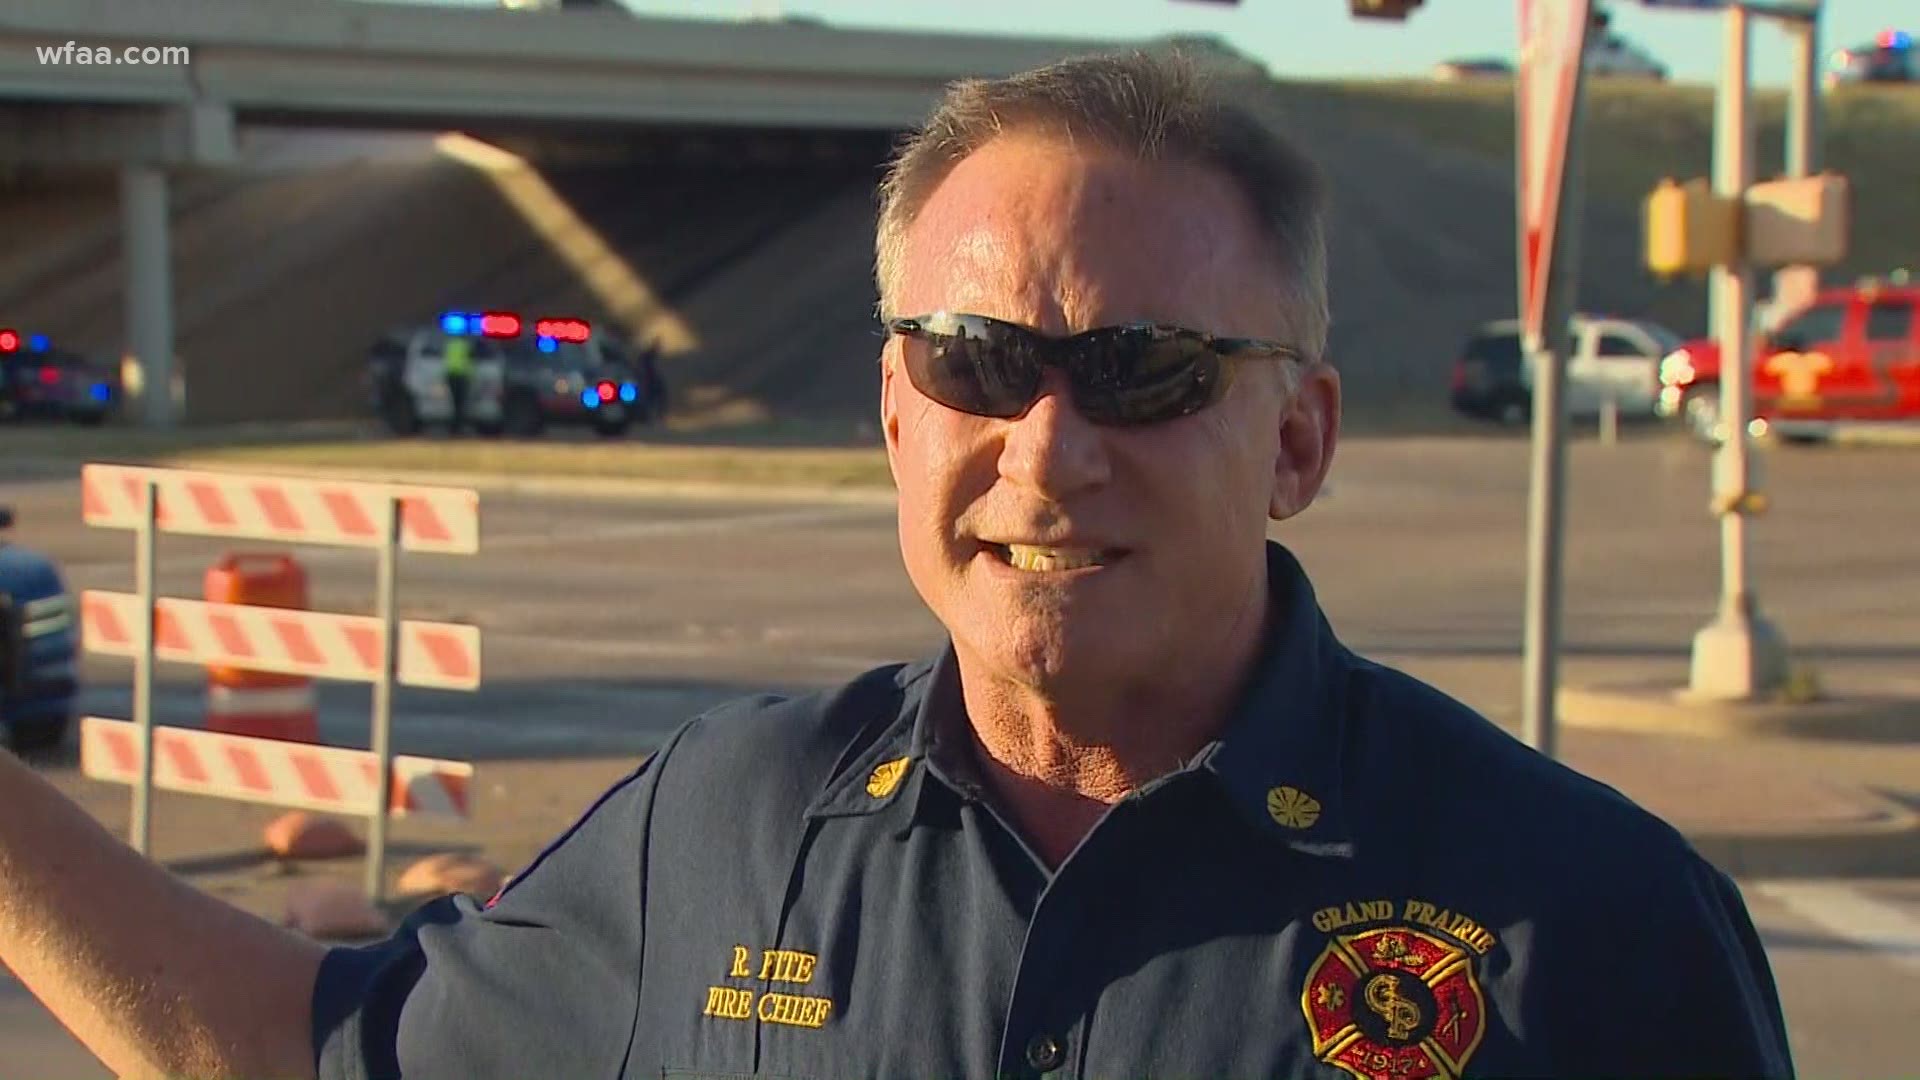 Fire Chief Robert Fite said they were working to confirm how many people were in the plane at the time of the crash.